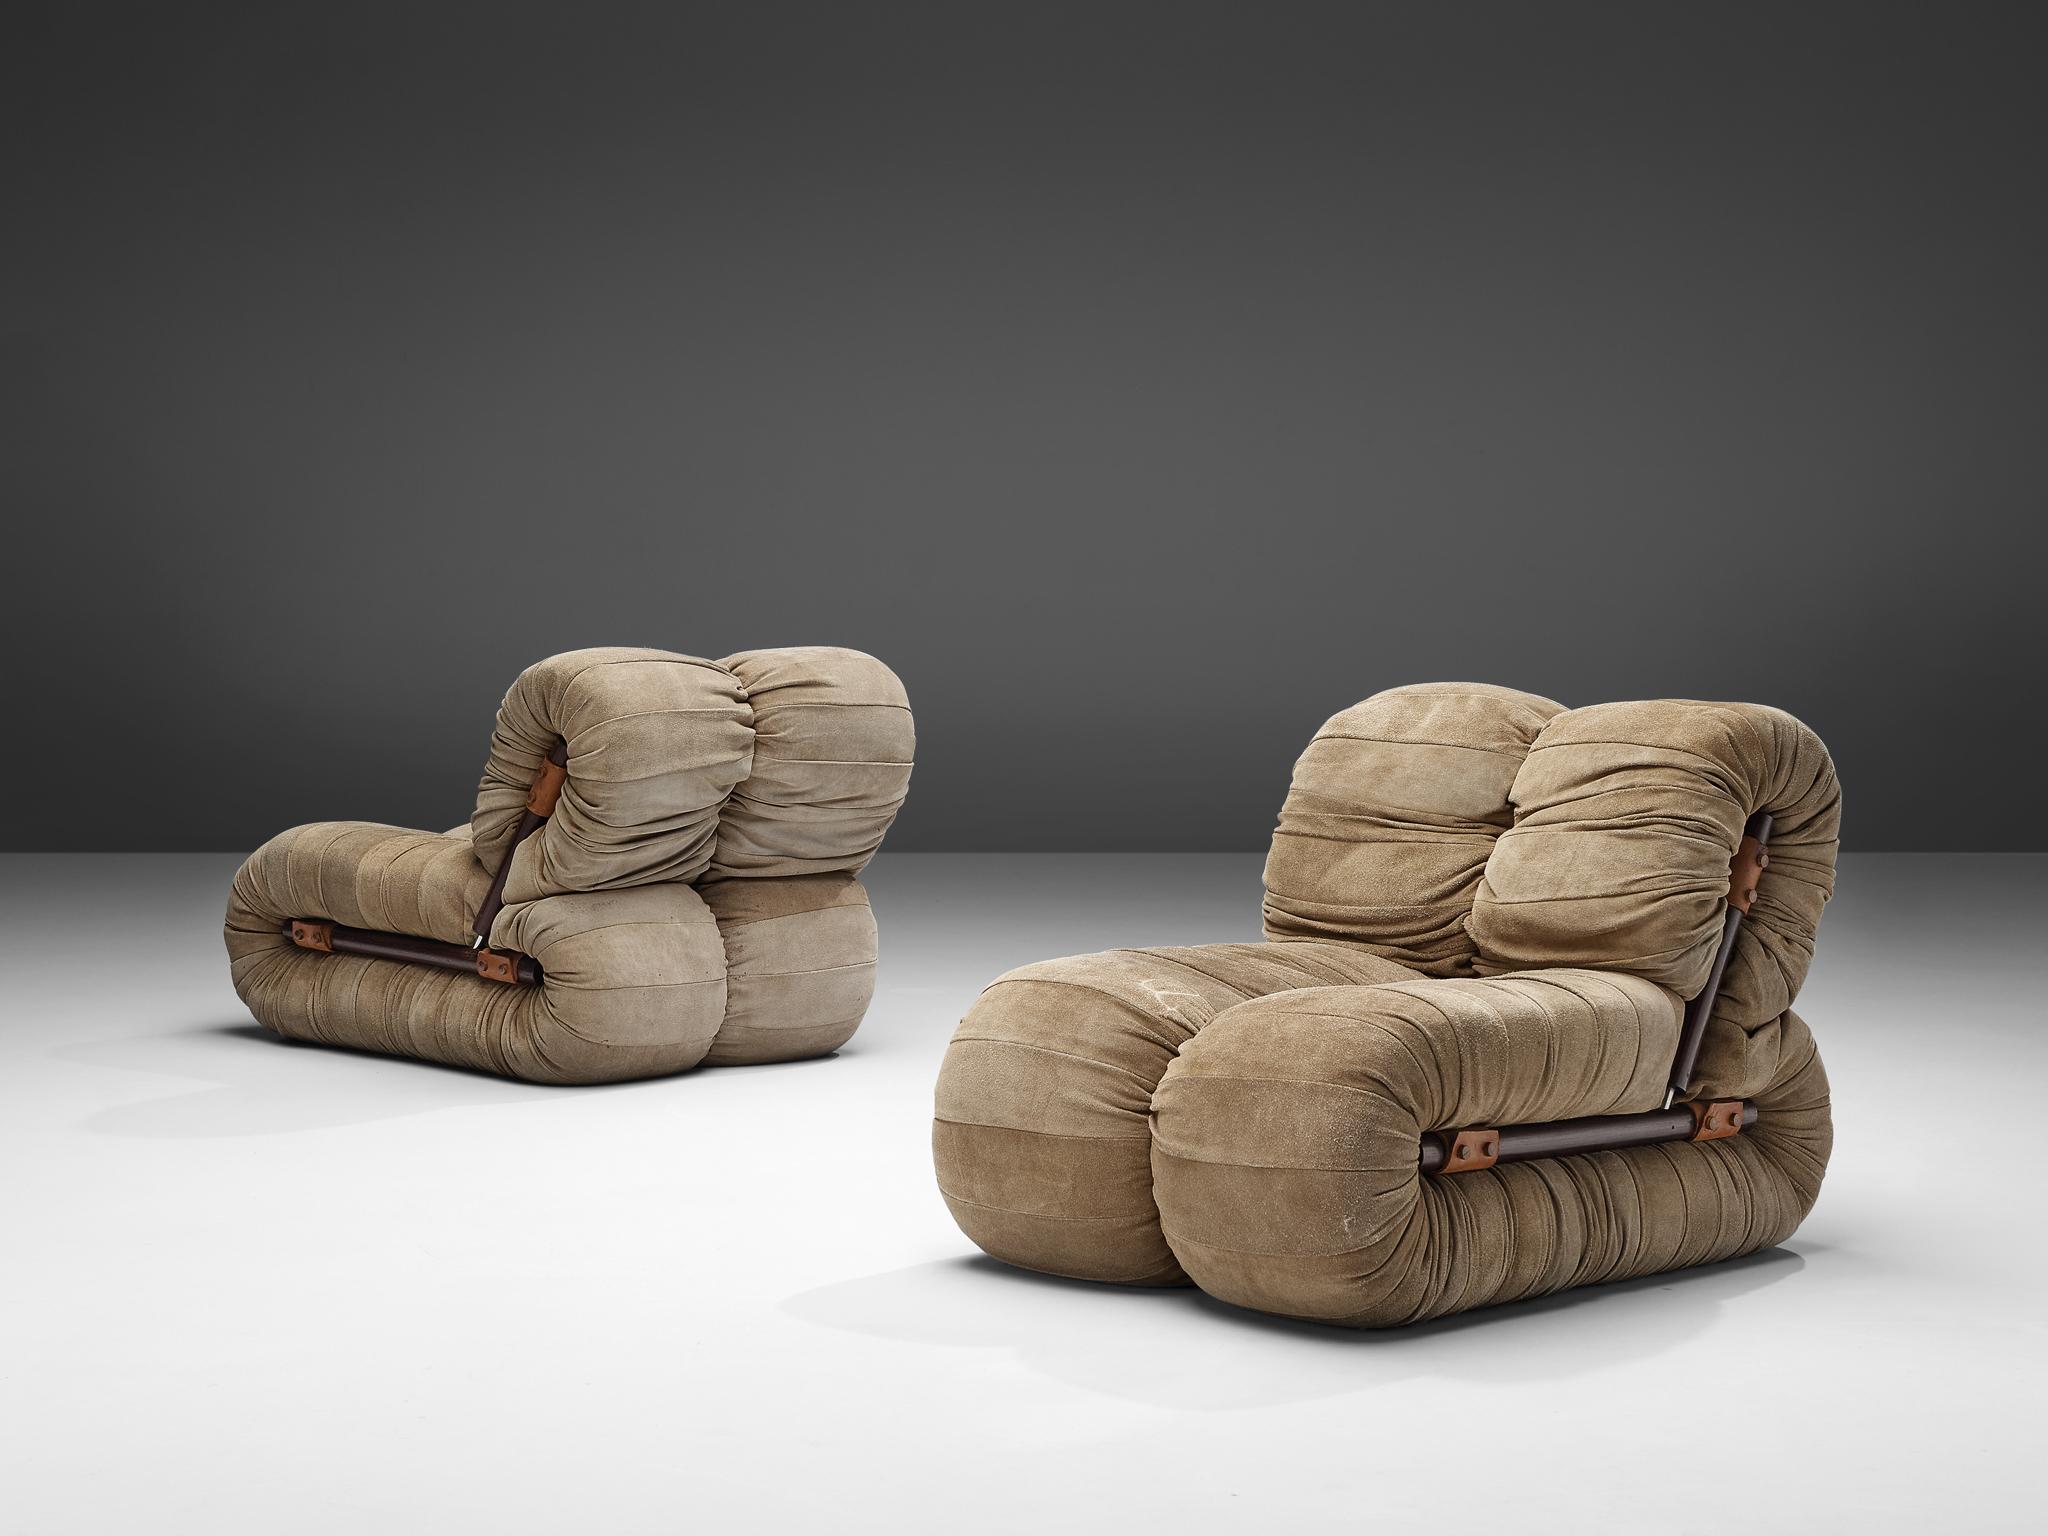 Percival Lafer Lounge Chairs in Nubuck Leather 2